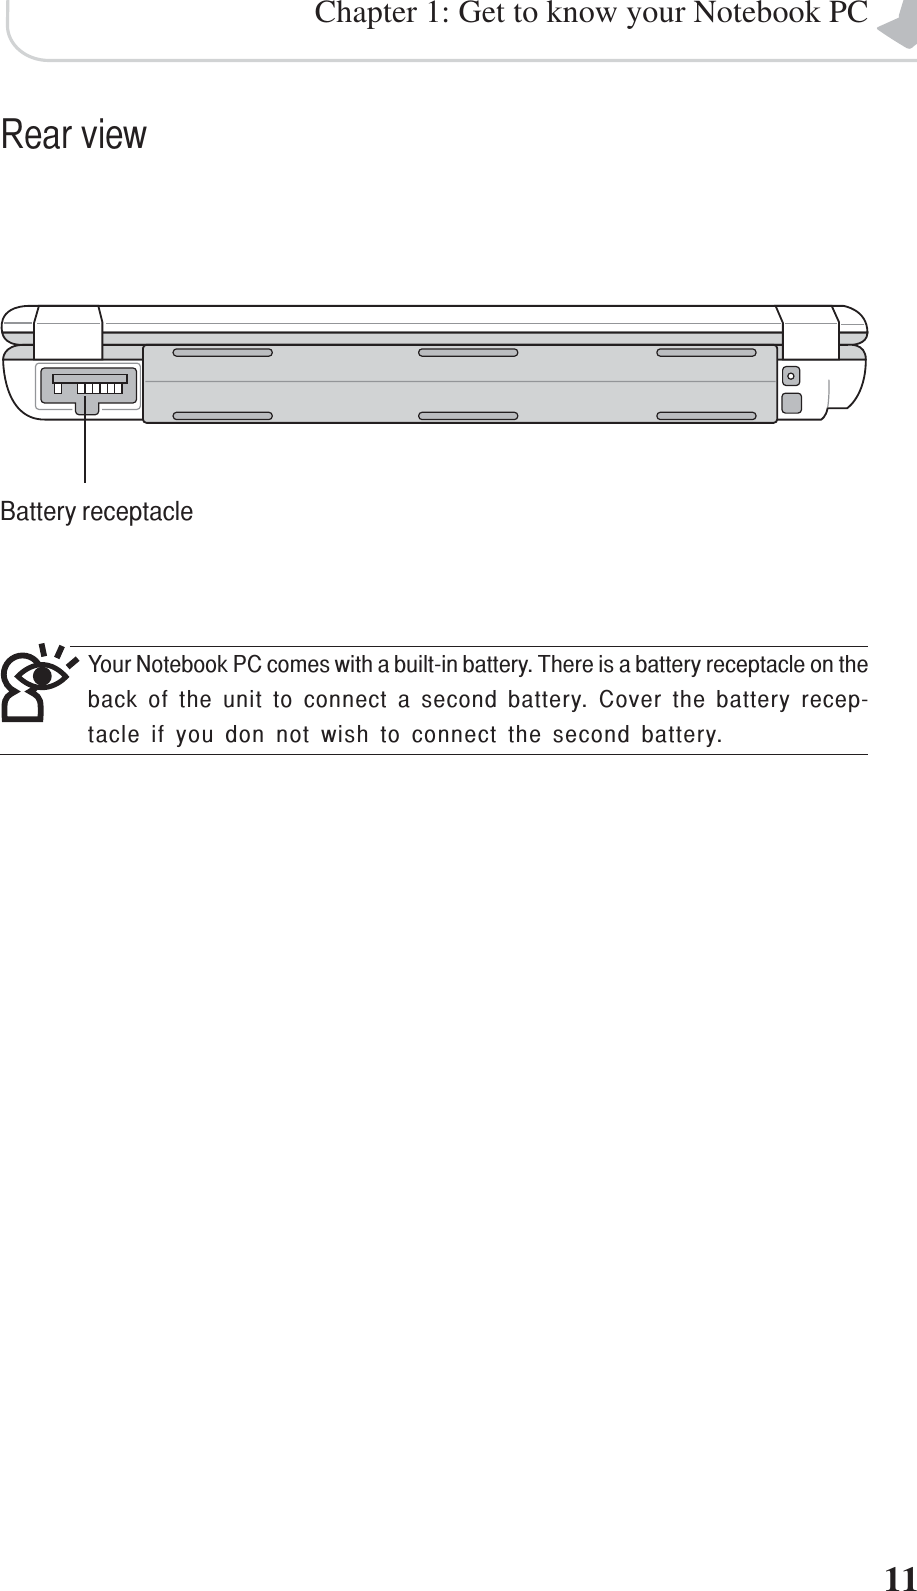 11Chapter 1: Get to know your Notebook PCRear viewBattery receptacleYour Notebook PC comes with a built-in battery. There is a battery receptacle on theback of the unit to connect a second battery. Cover the battery recep-tacle if you don not wish to connect the second battery.